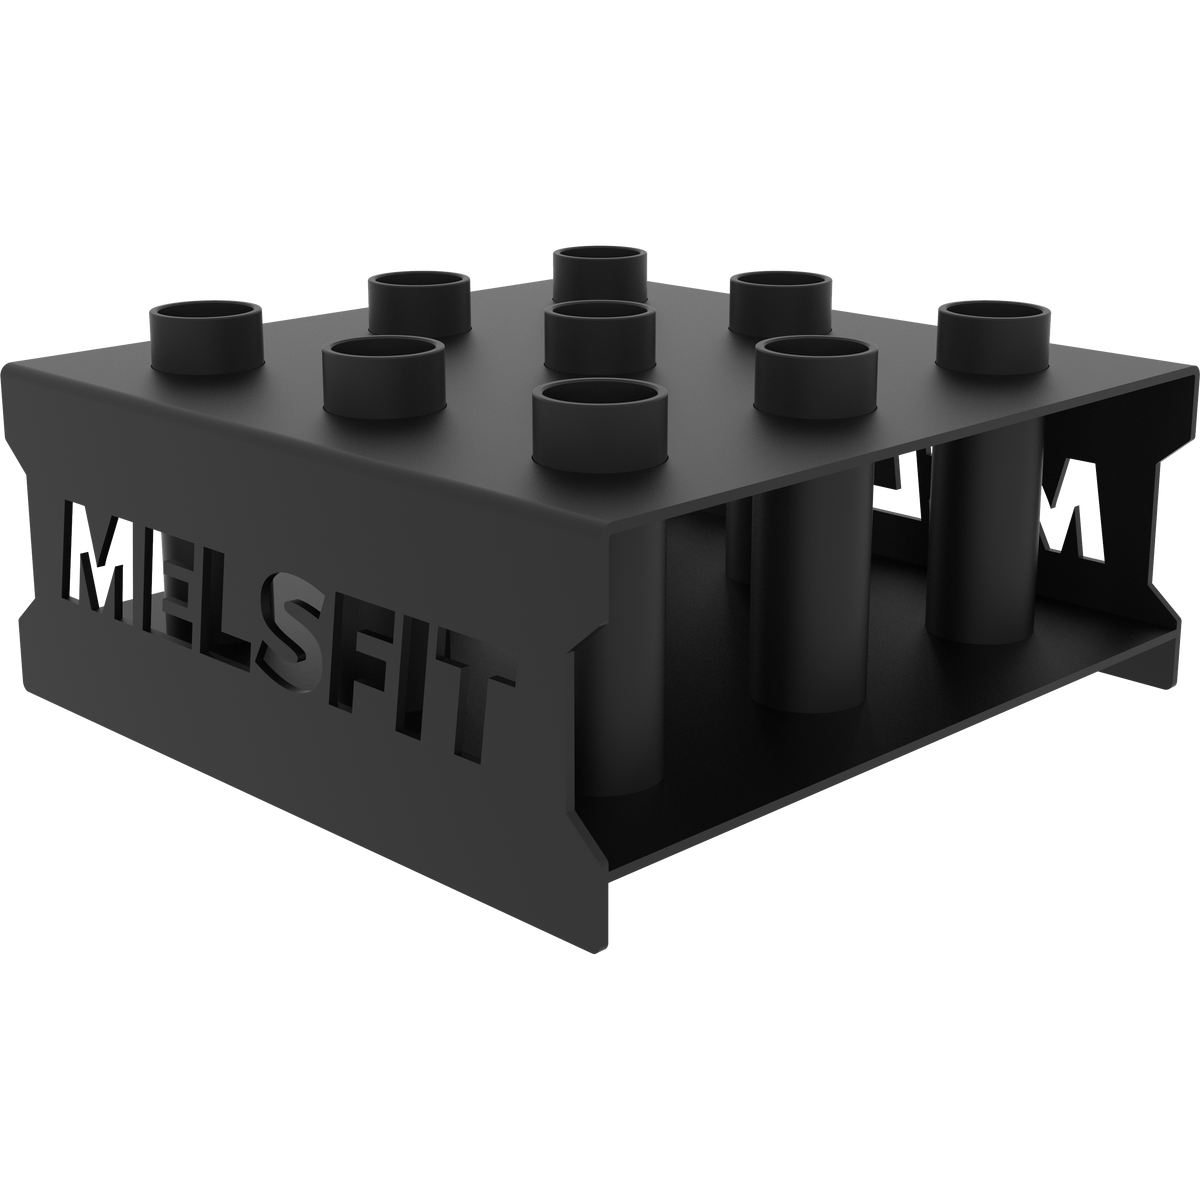 Barbell cube storage on floor - Melsfit Performance